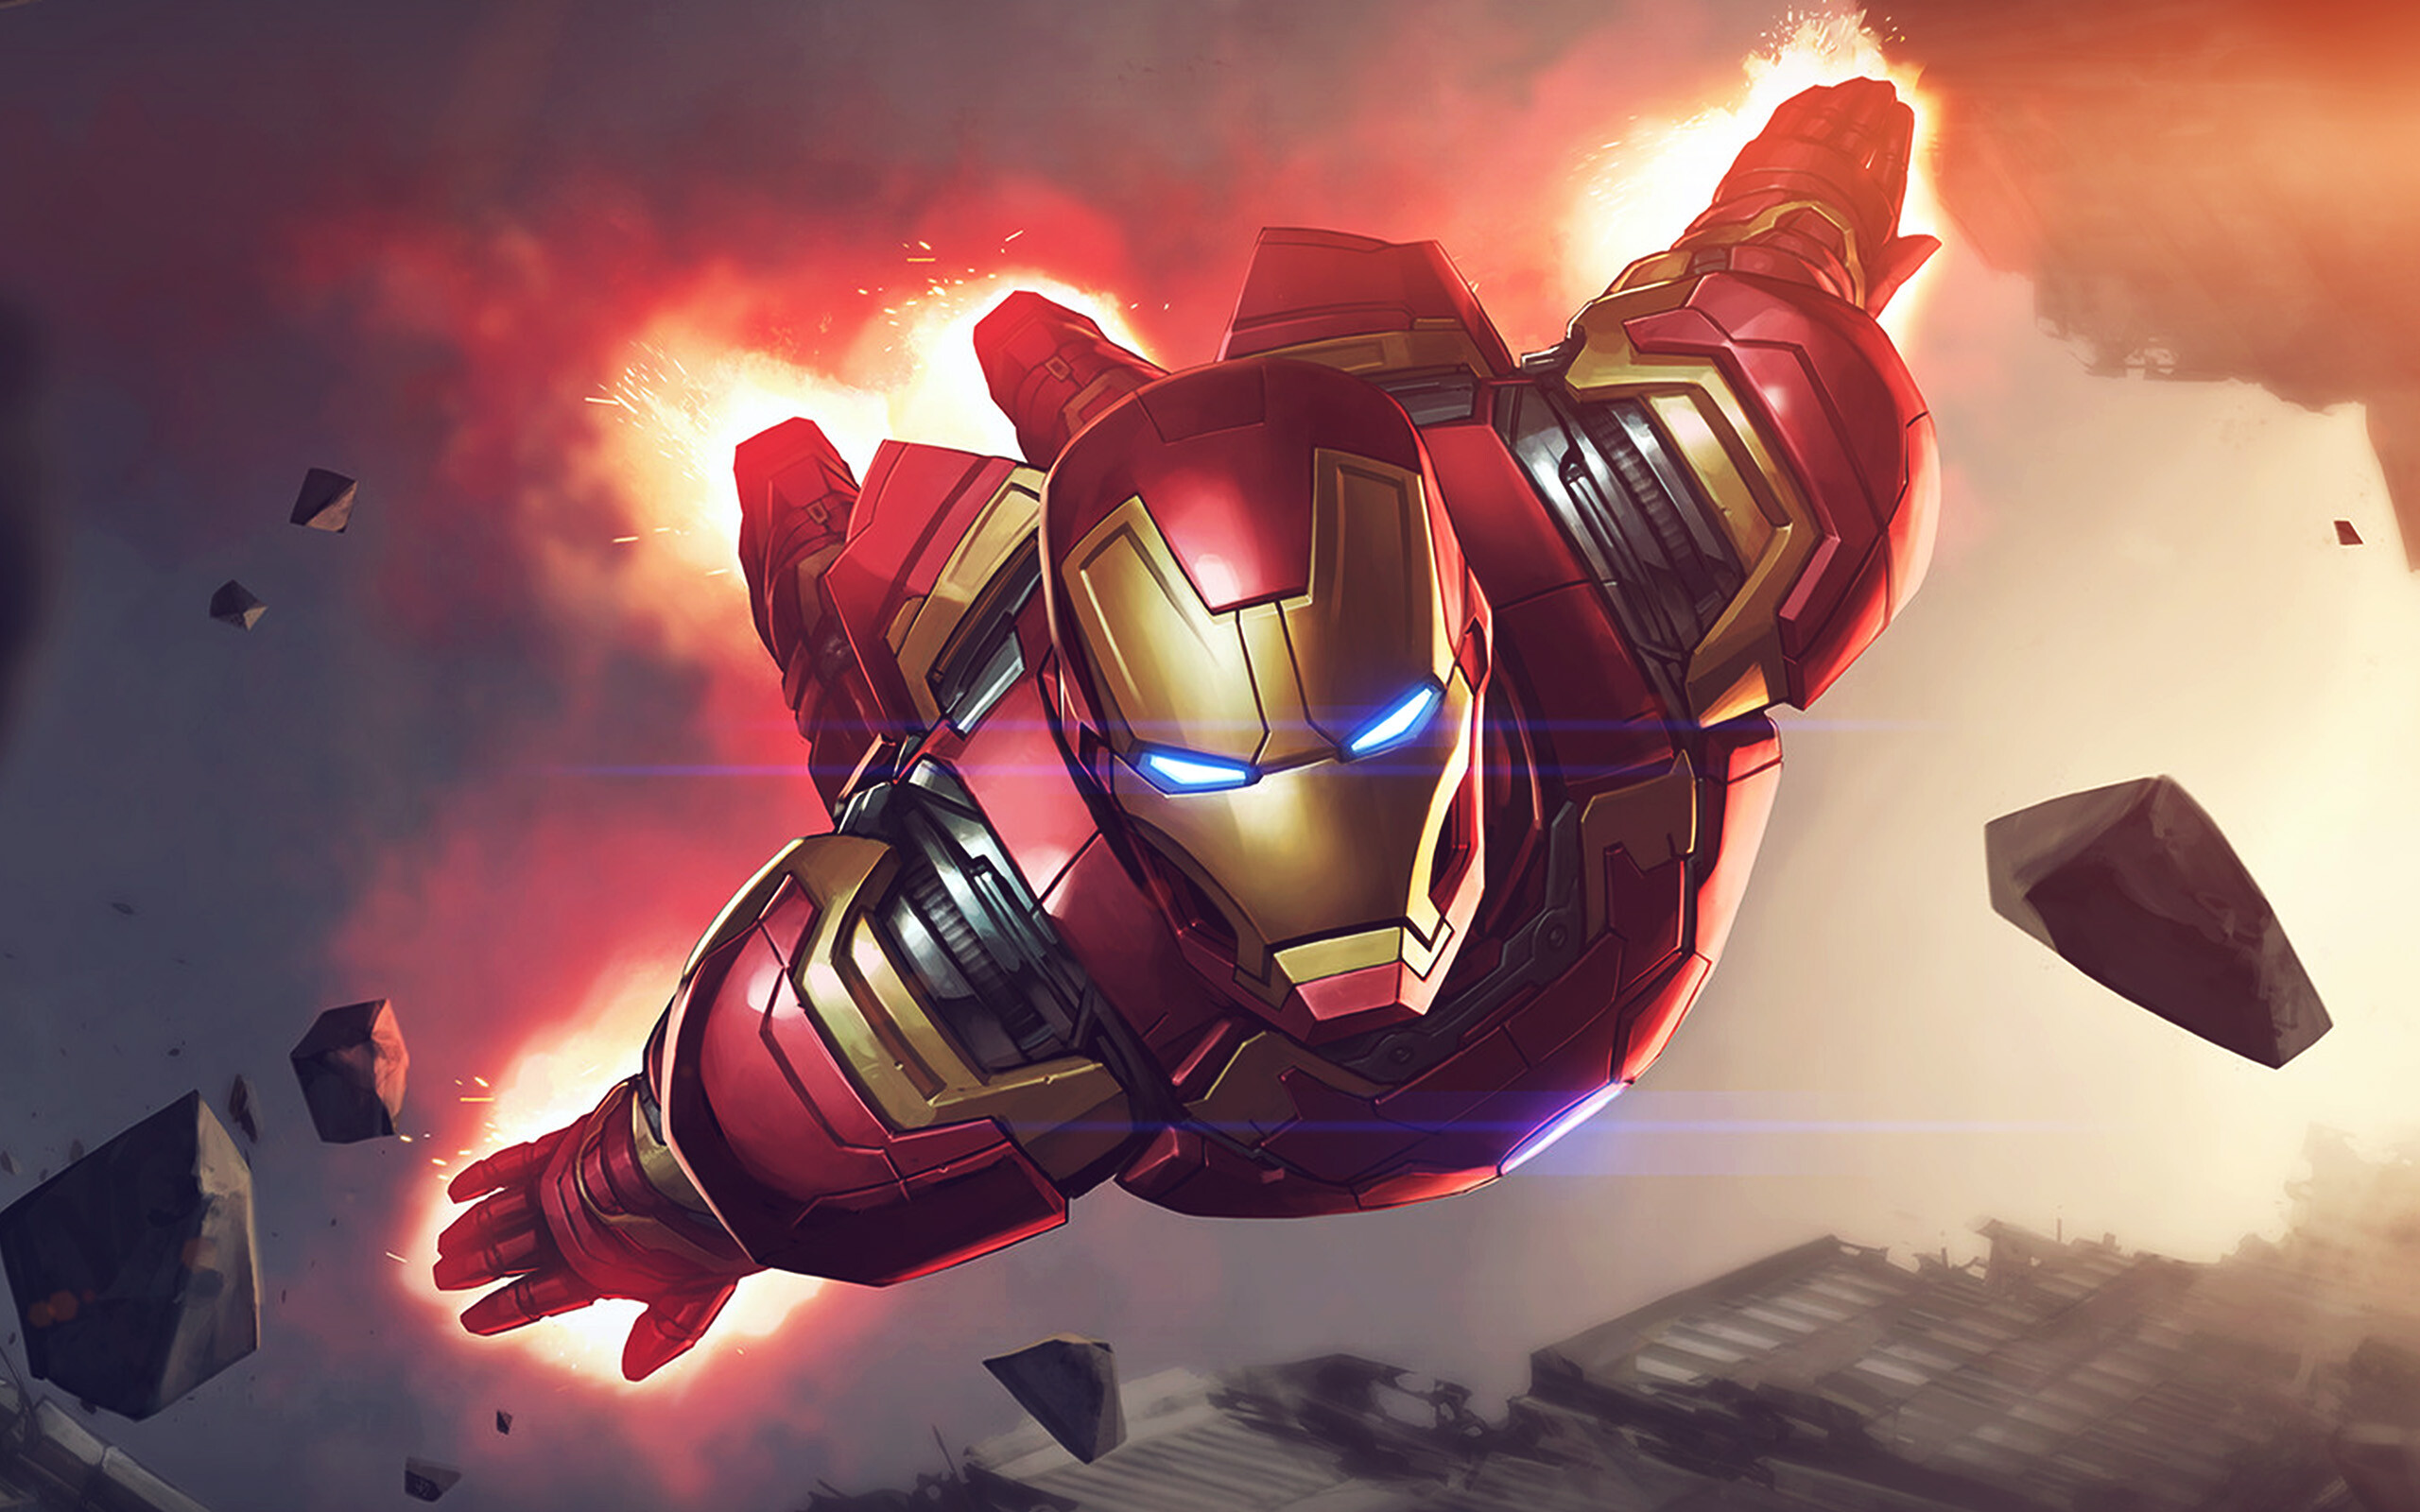 Marvel Heroes: Iron Man, The character was co-created by writer and editor Stan Lee. 2560x1600 HD Wallpaper.